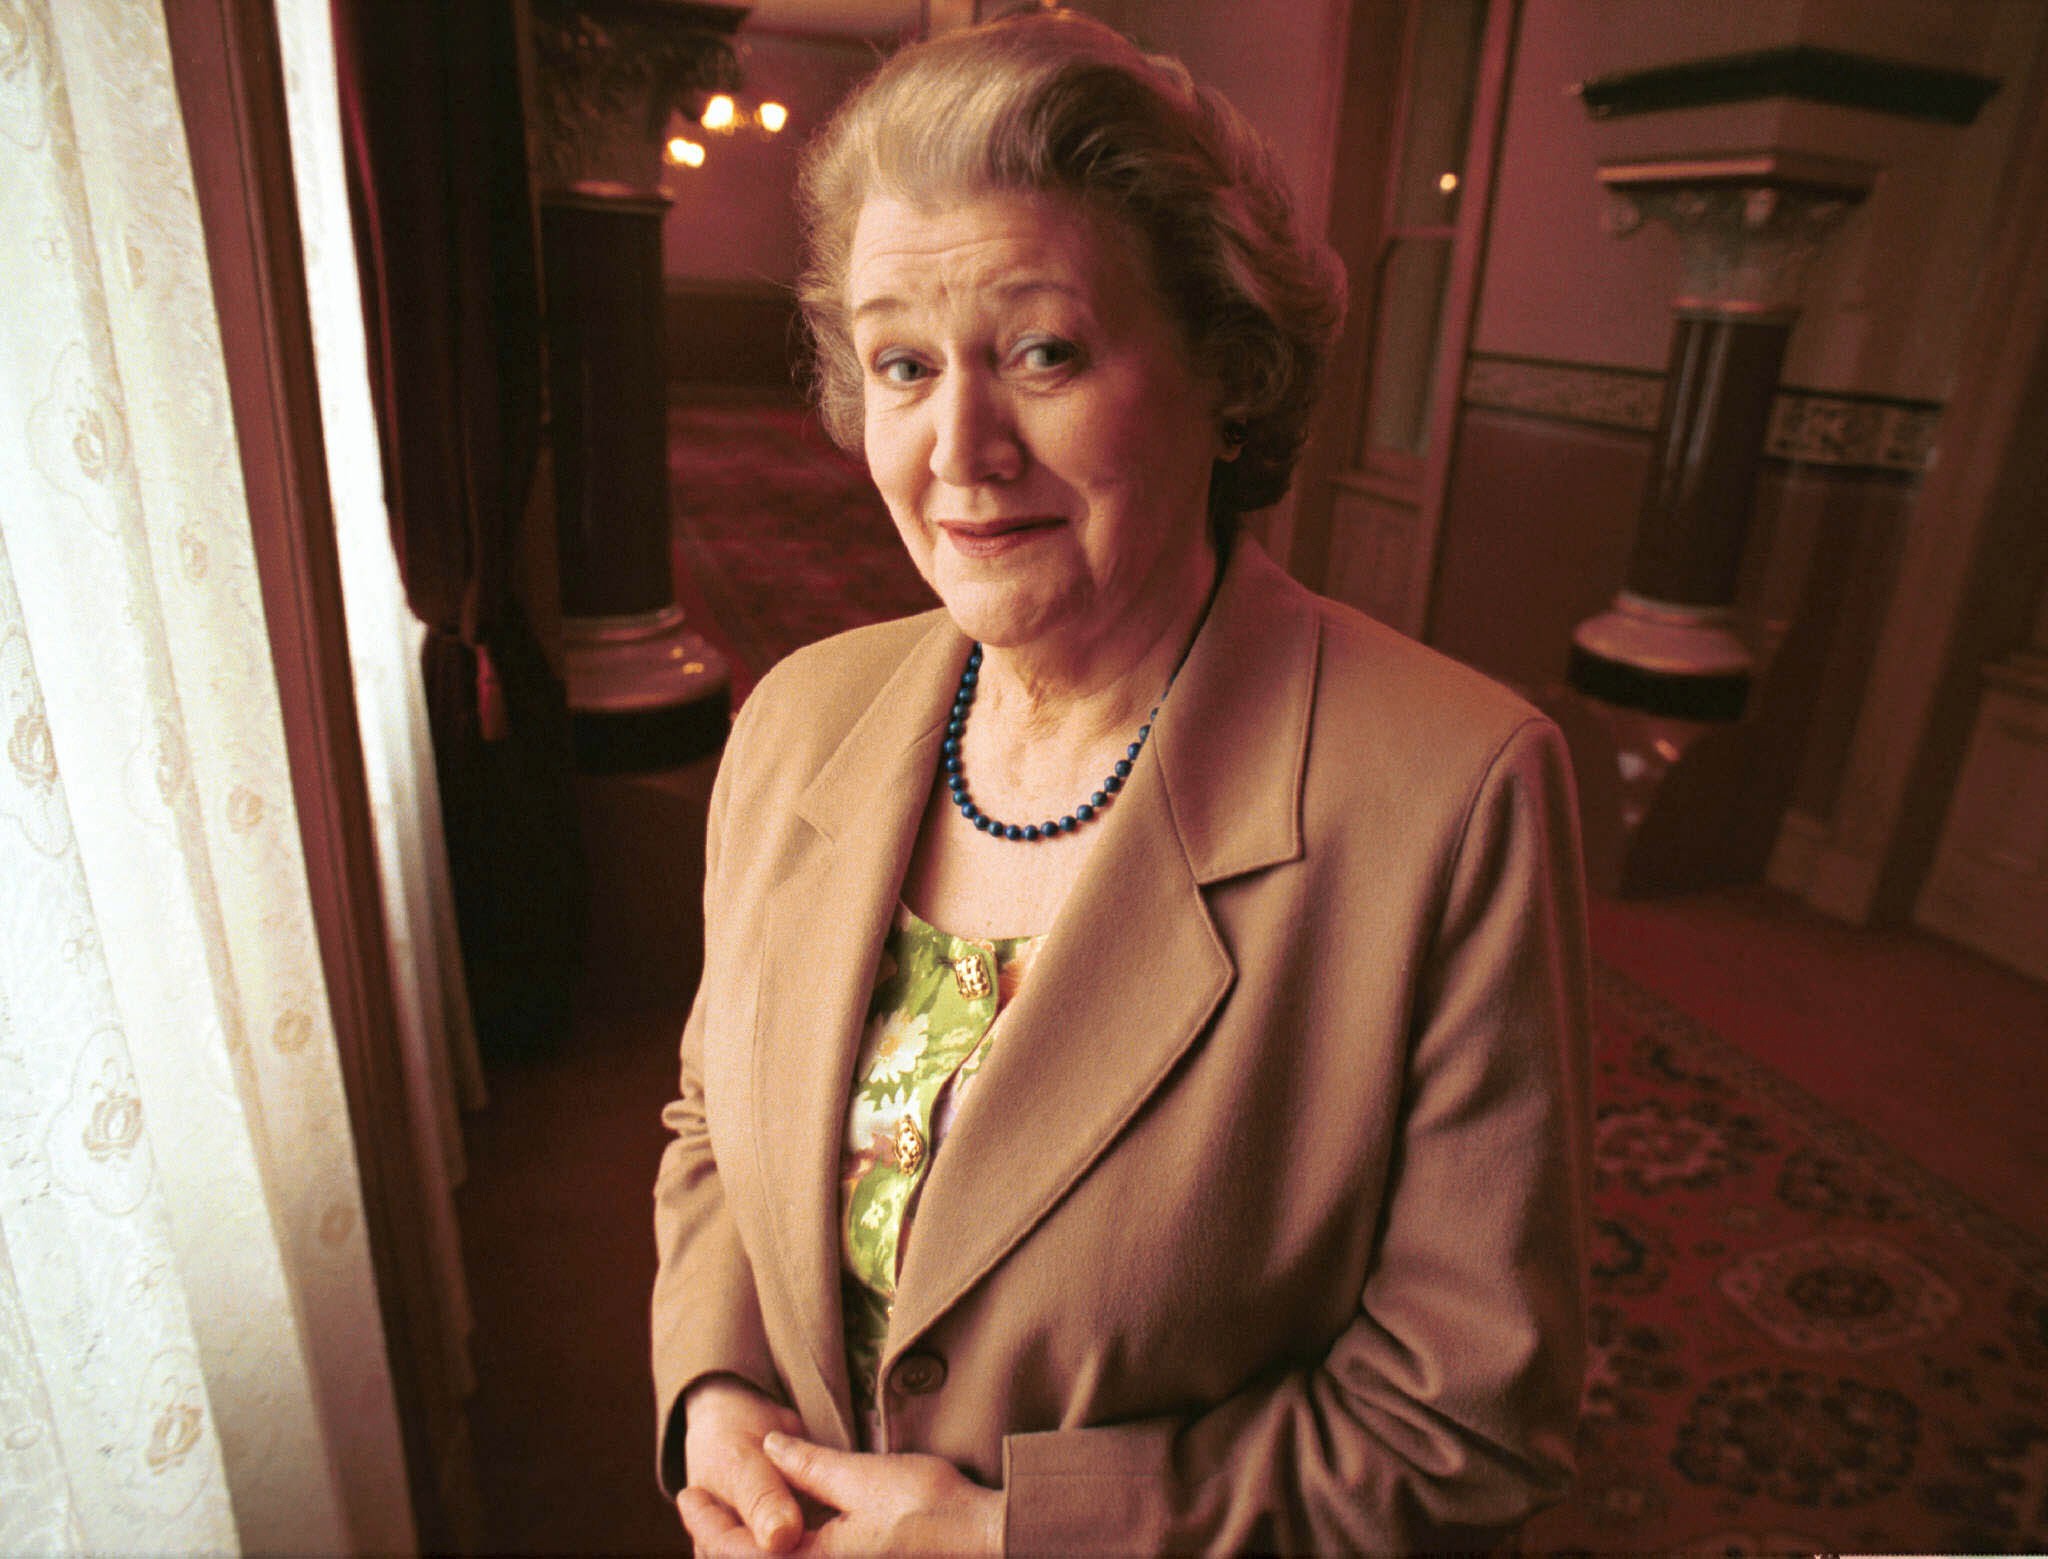 CHP_Export_64498142_09-08-2000 Actor Patricia Routledge in Australia to play Lady Bracknell inth.jpg